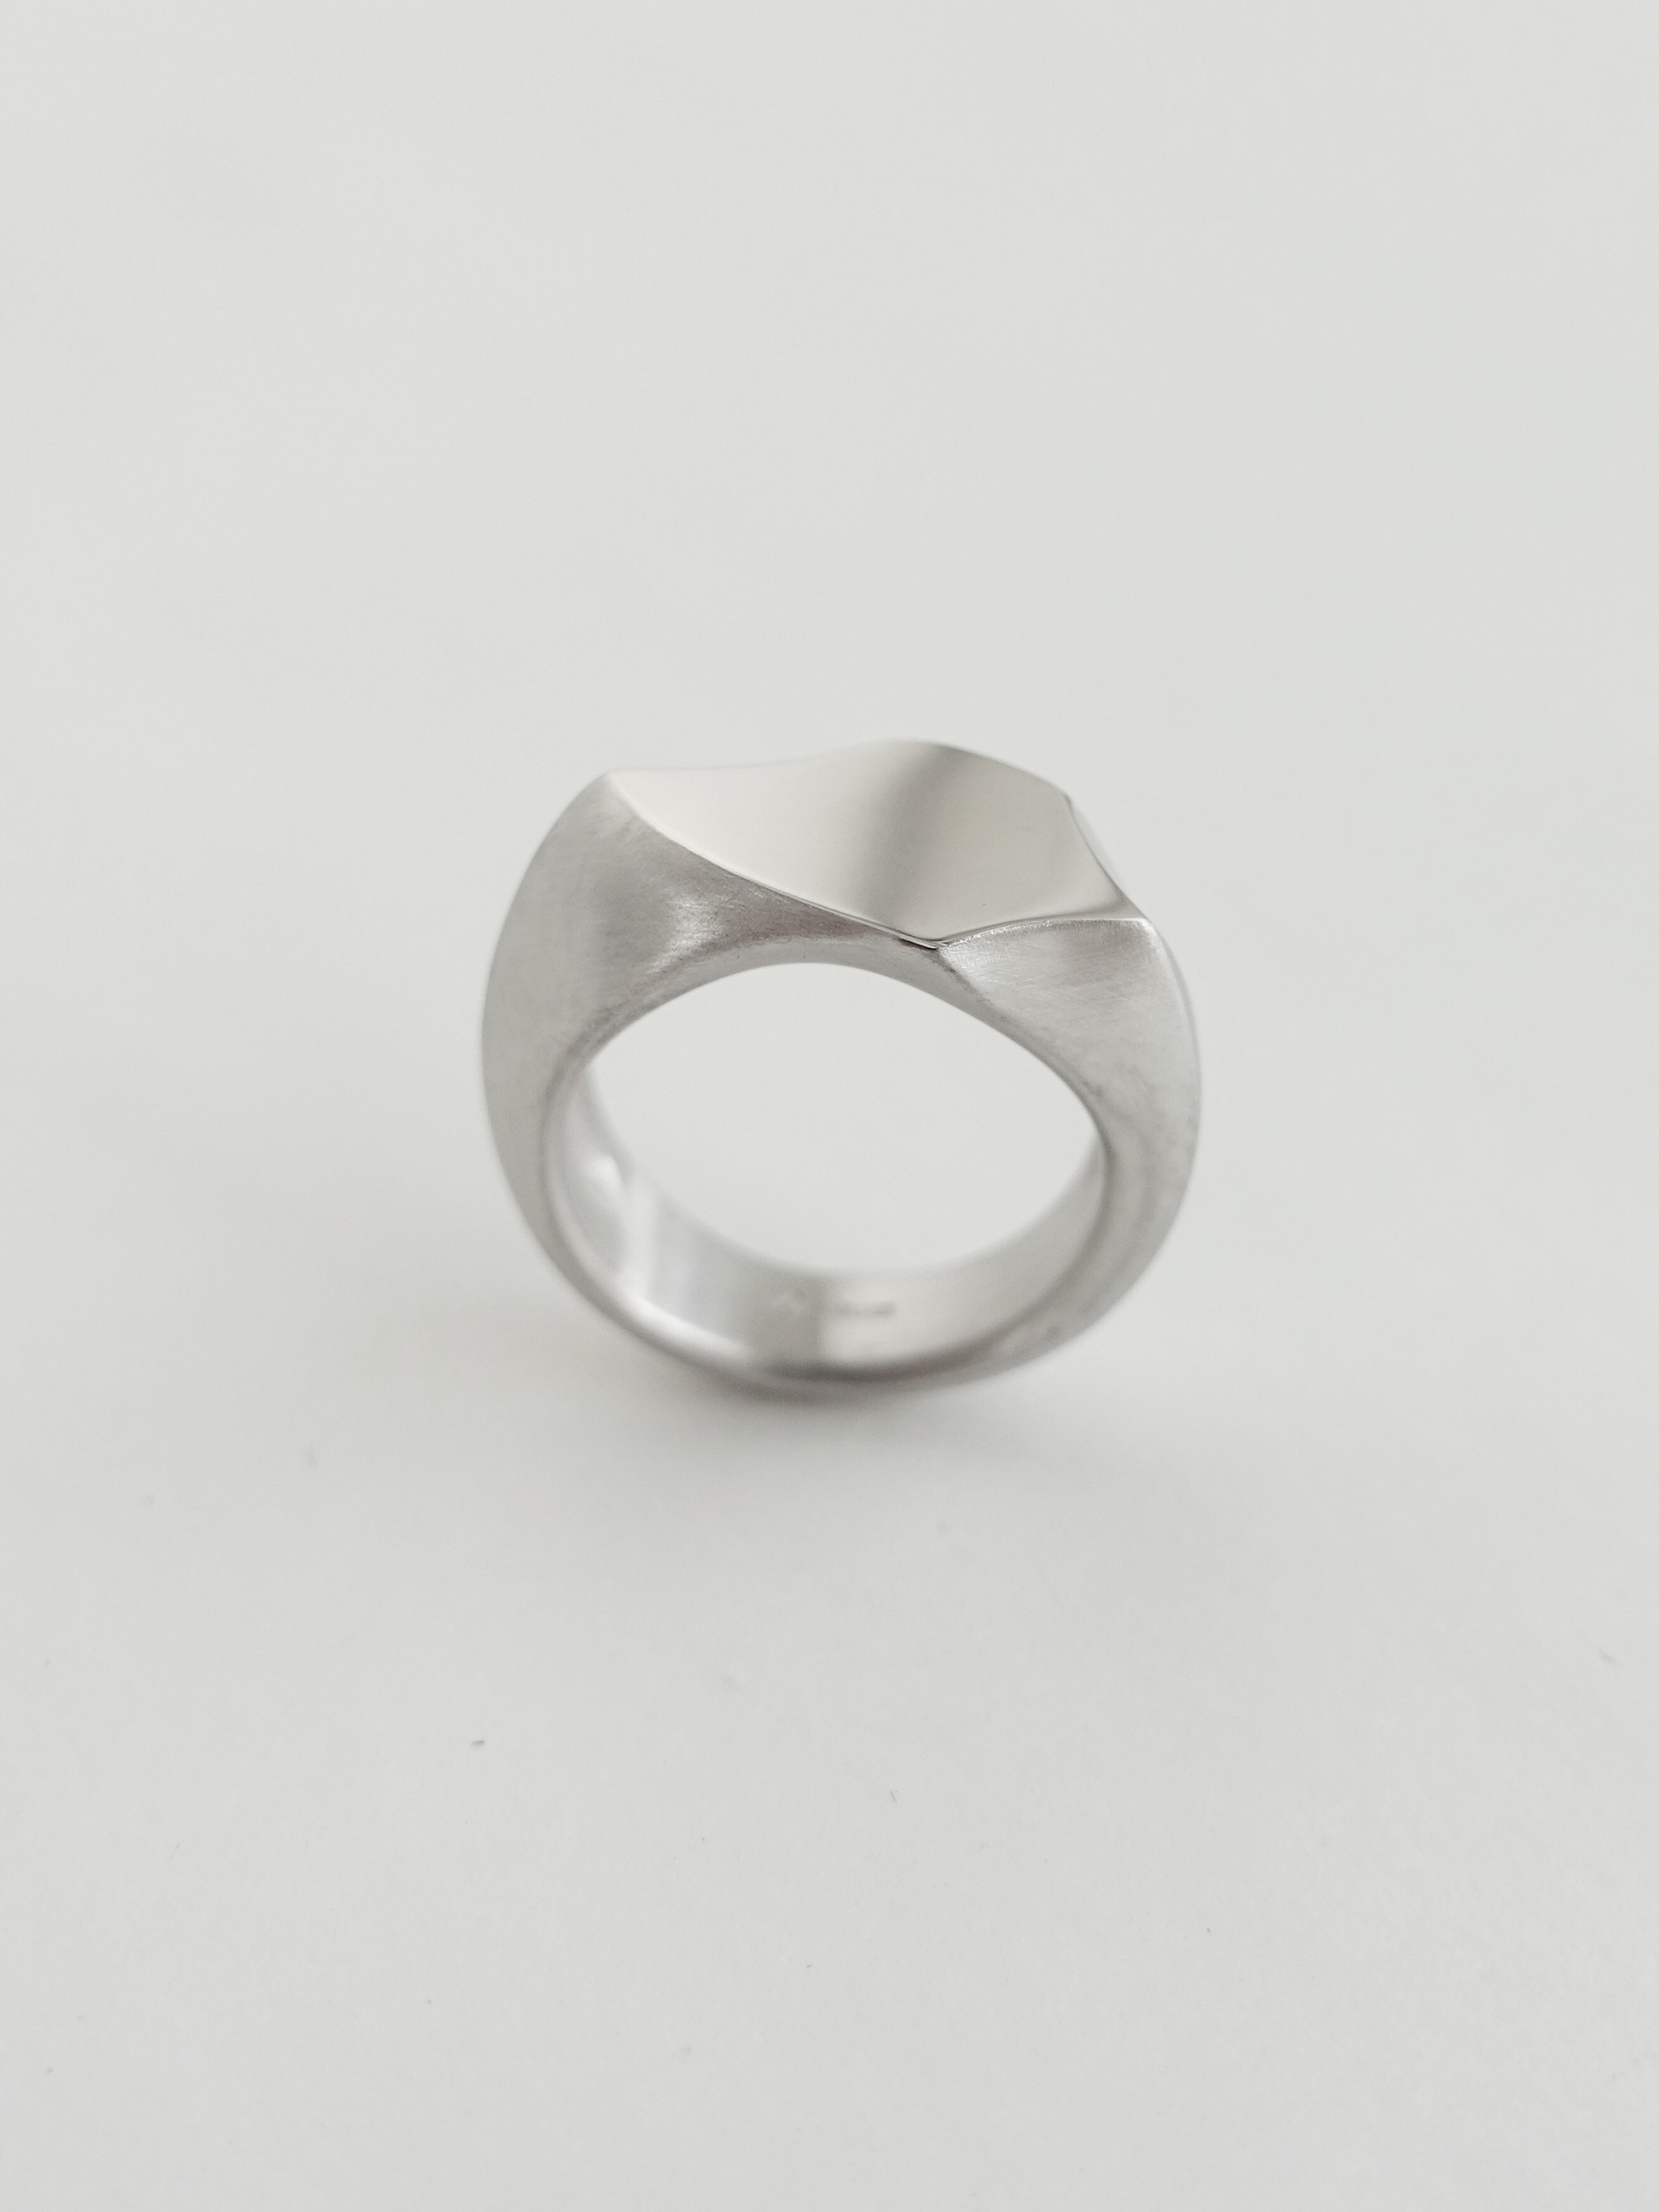 〈RECOLLECTION〉2:5 ring